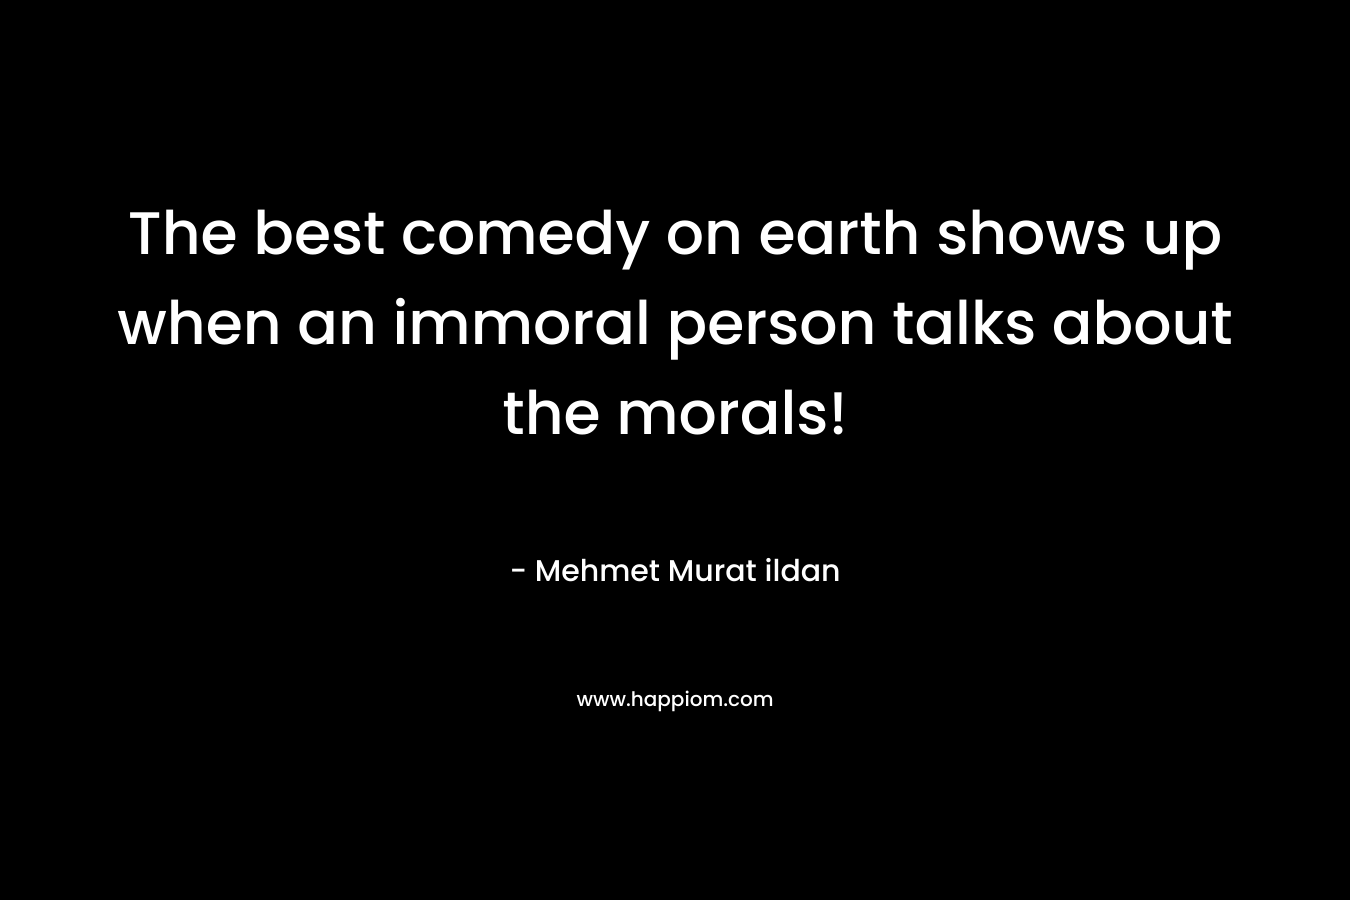 The best comedy on earth shows up when an immoral person talks about the morals!